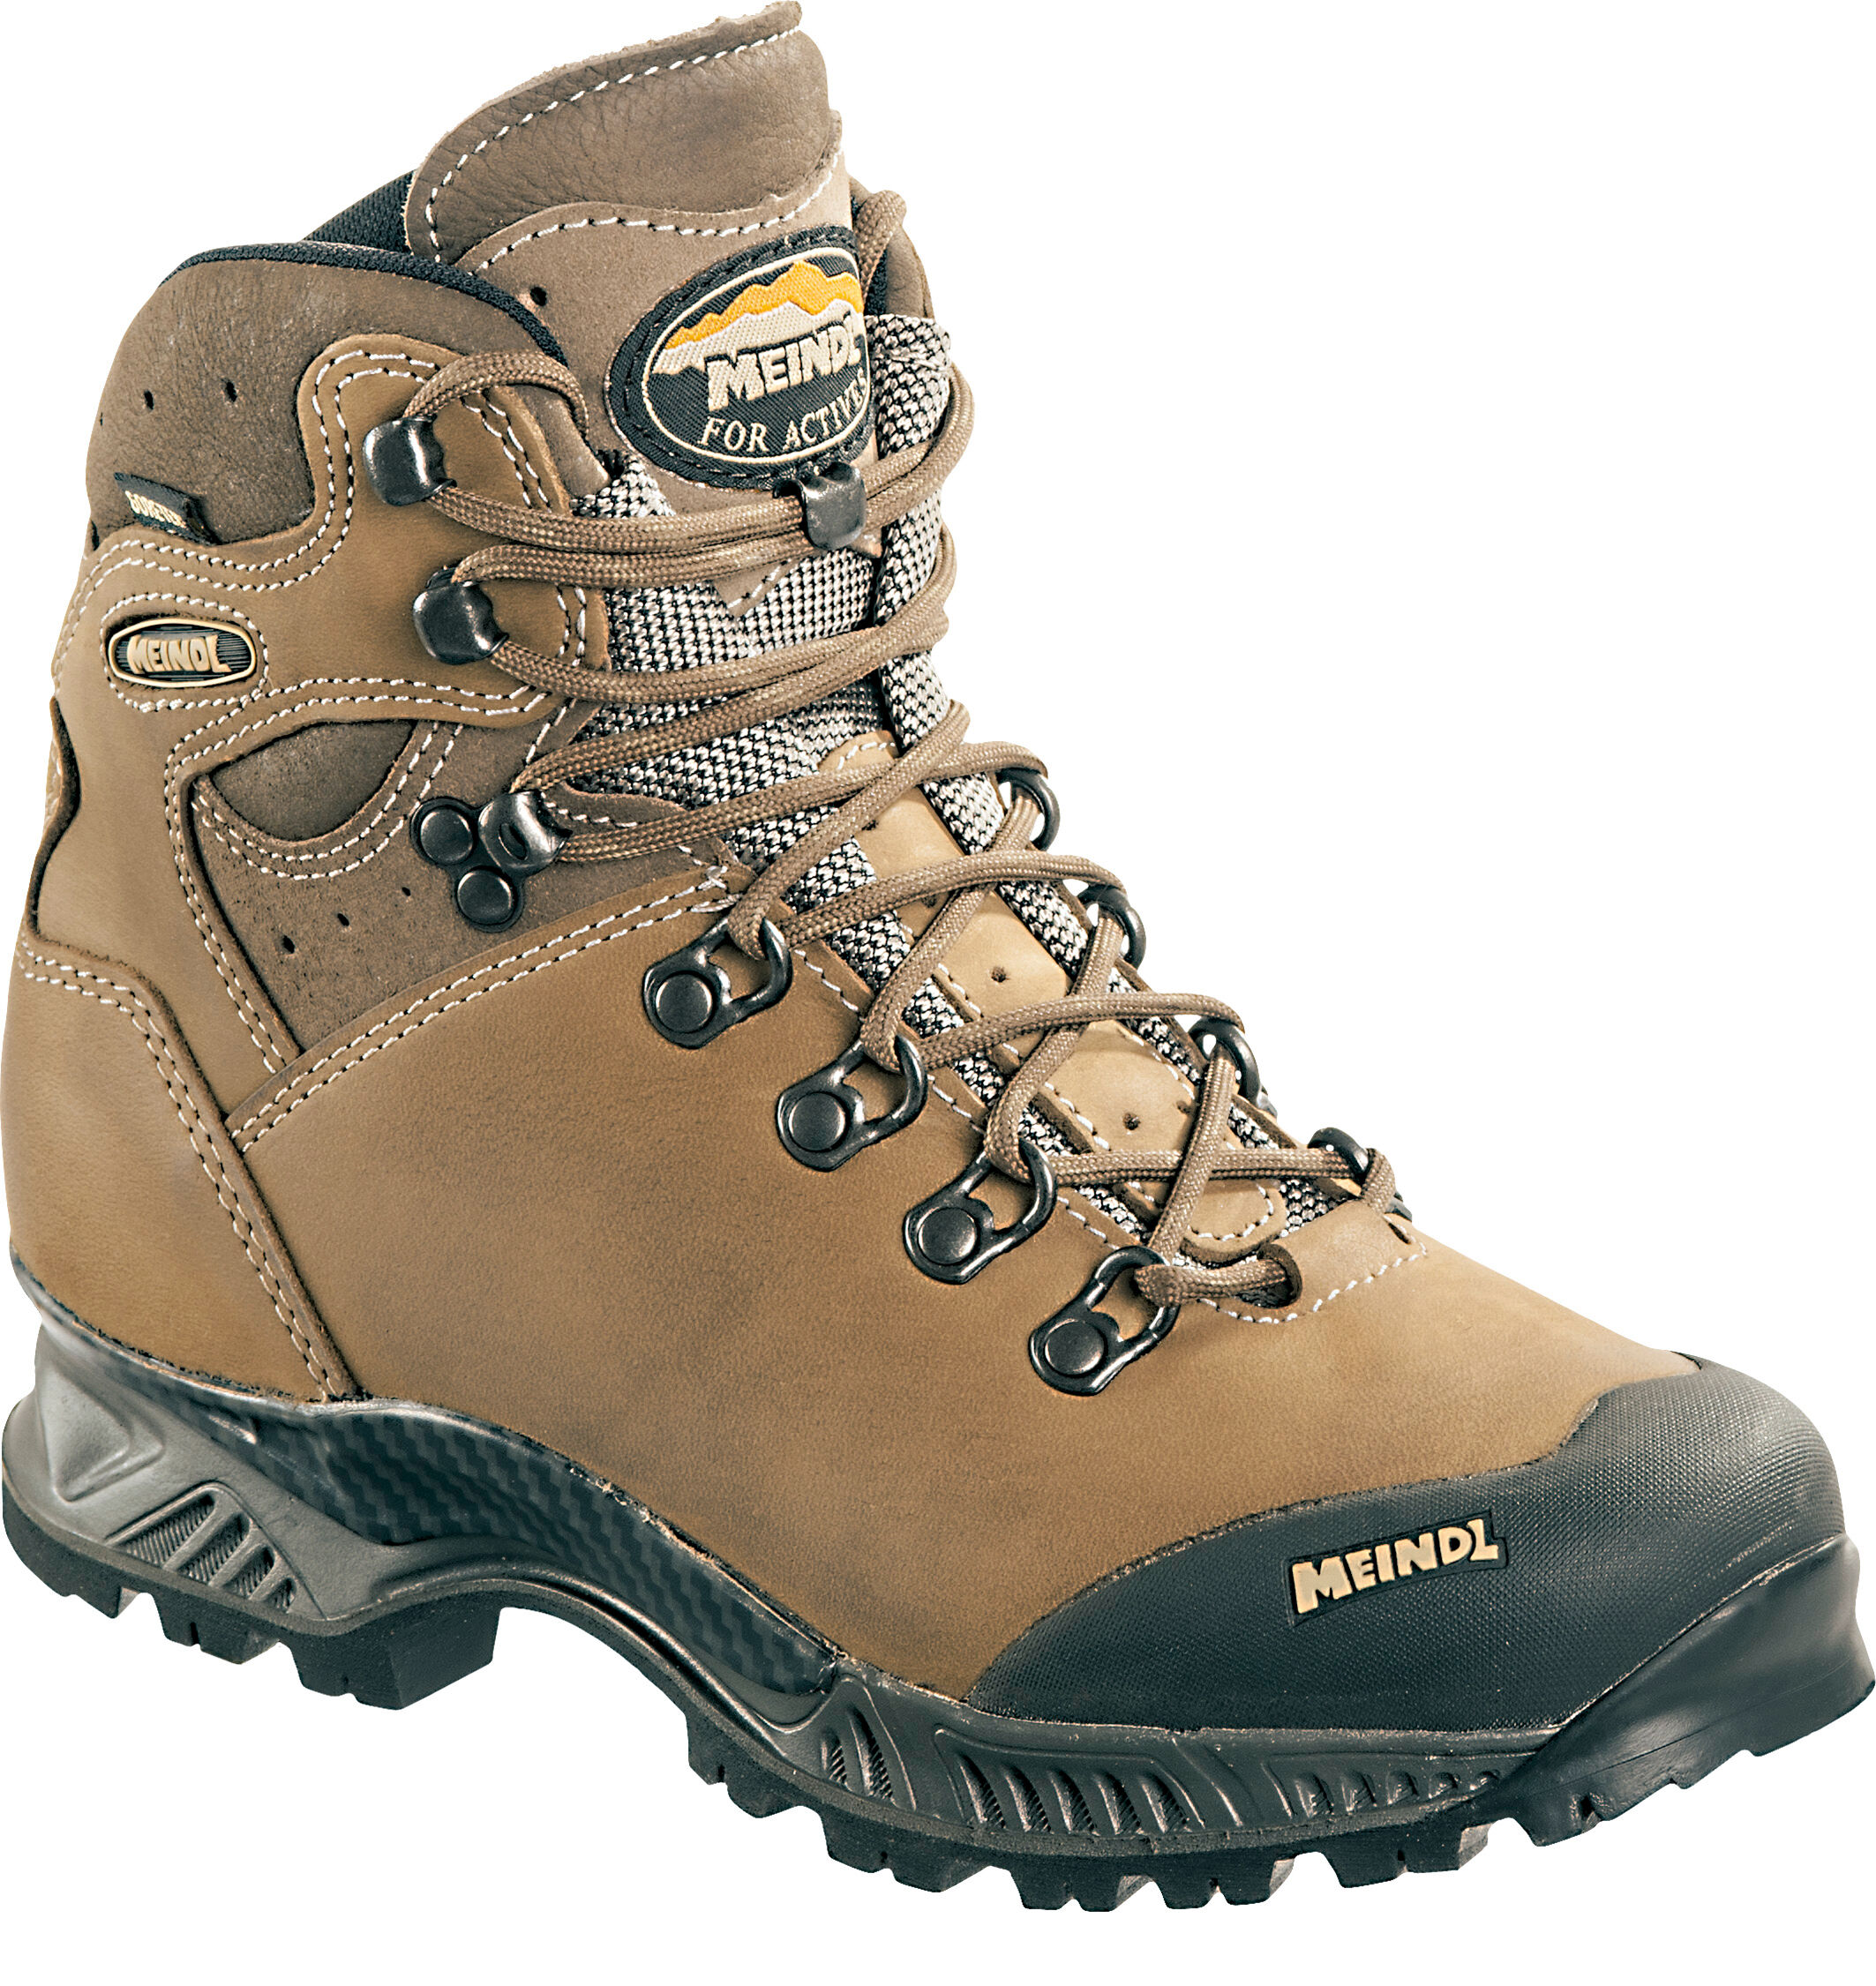 Meindl - Softline Lady TOP GTX® - Hiking Boots - Women's